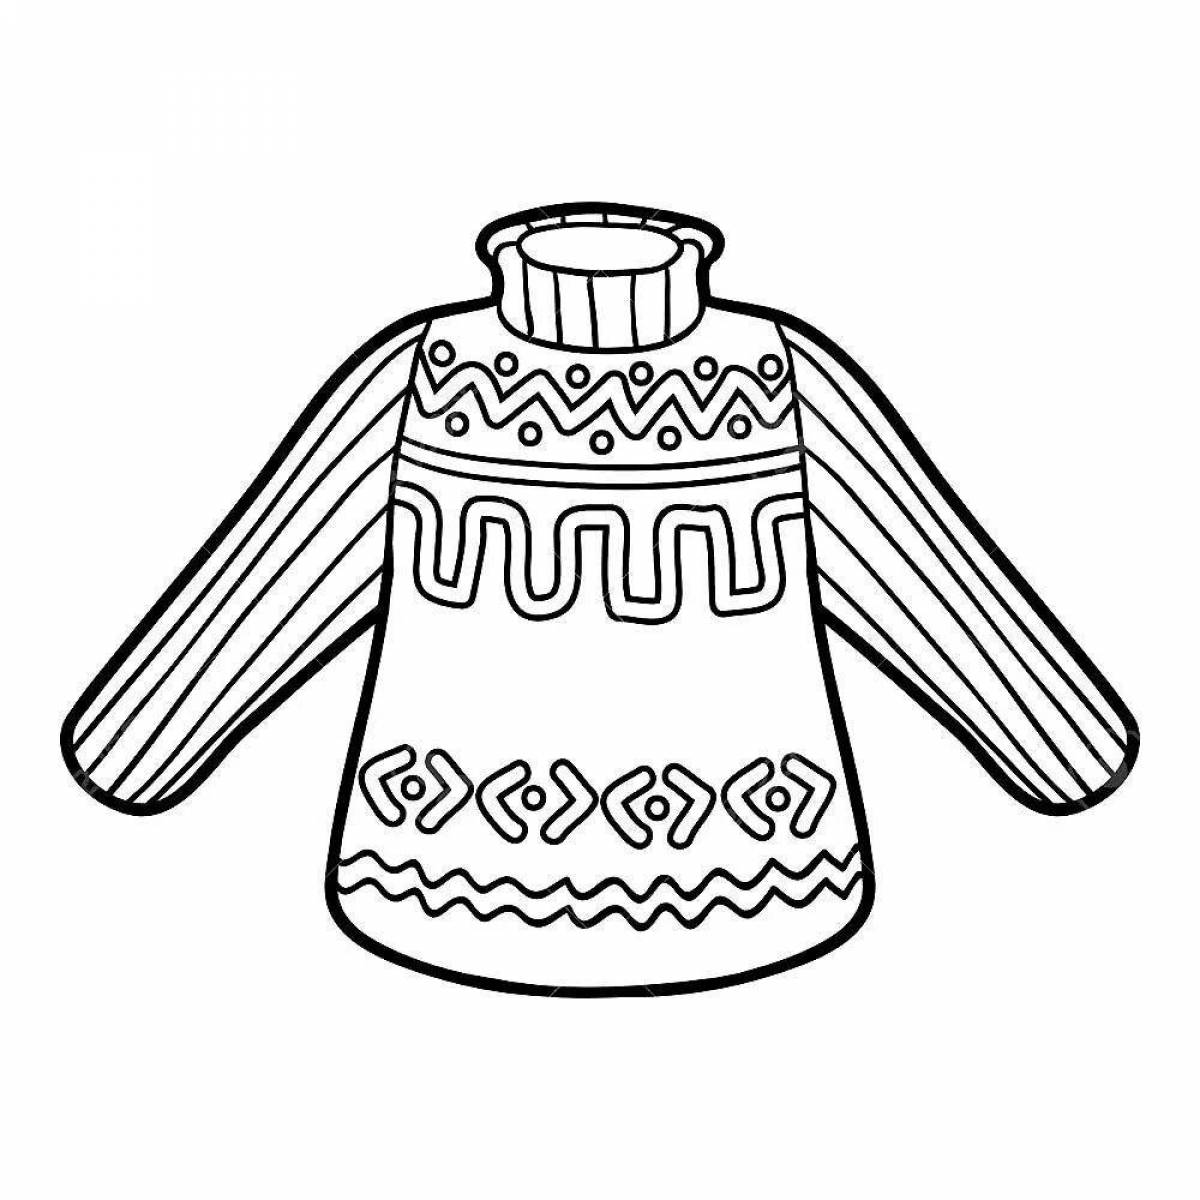 Coloring page magic sweater for preschoolers